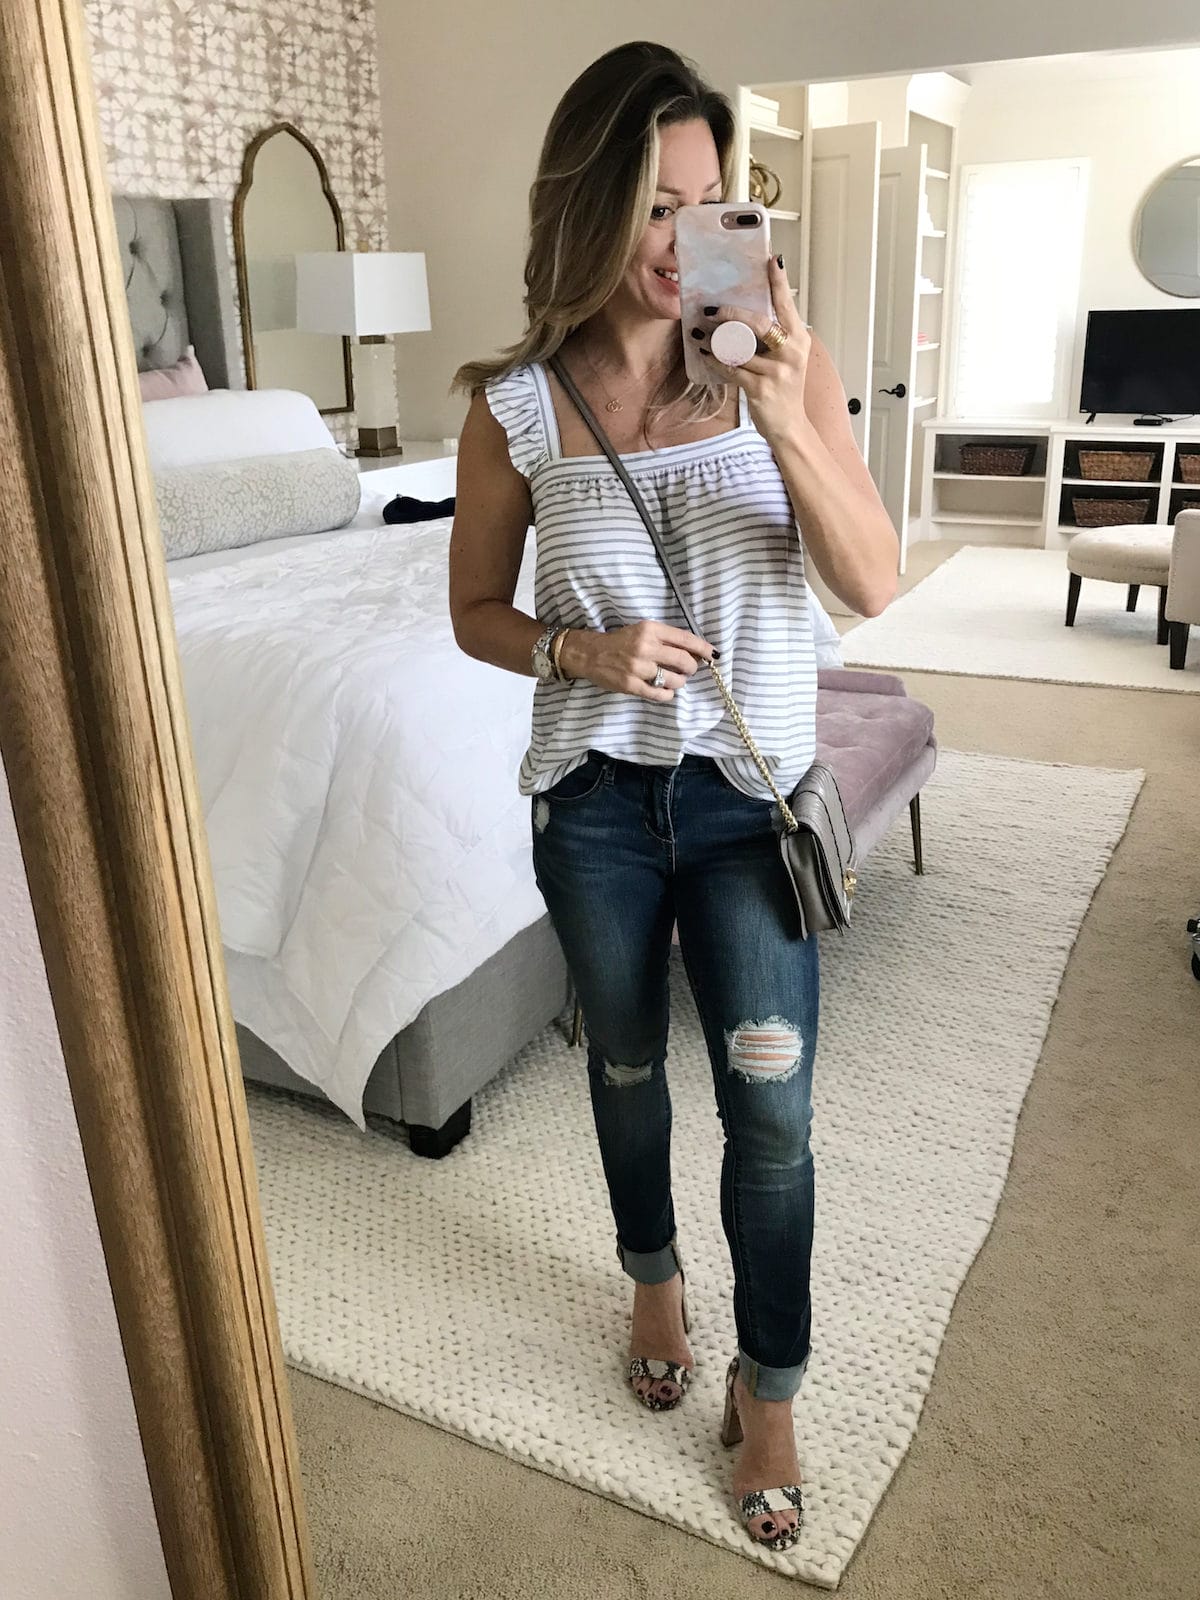 Jeans Outfit Ideas: 9 Super Cute Ways To Style Your Denim This Fall -   Fashion Blog